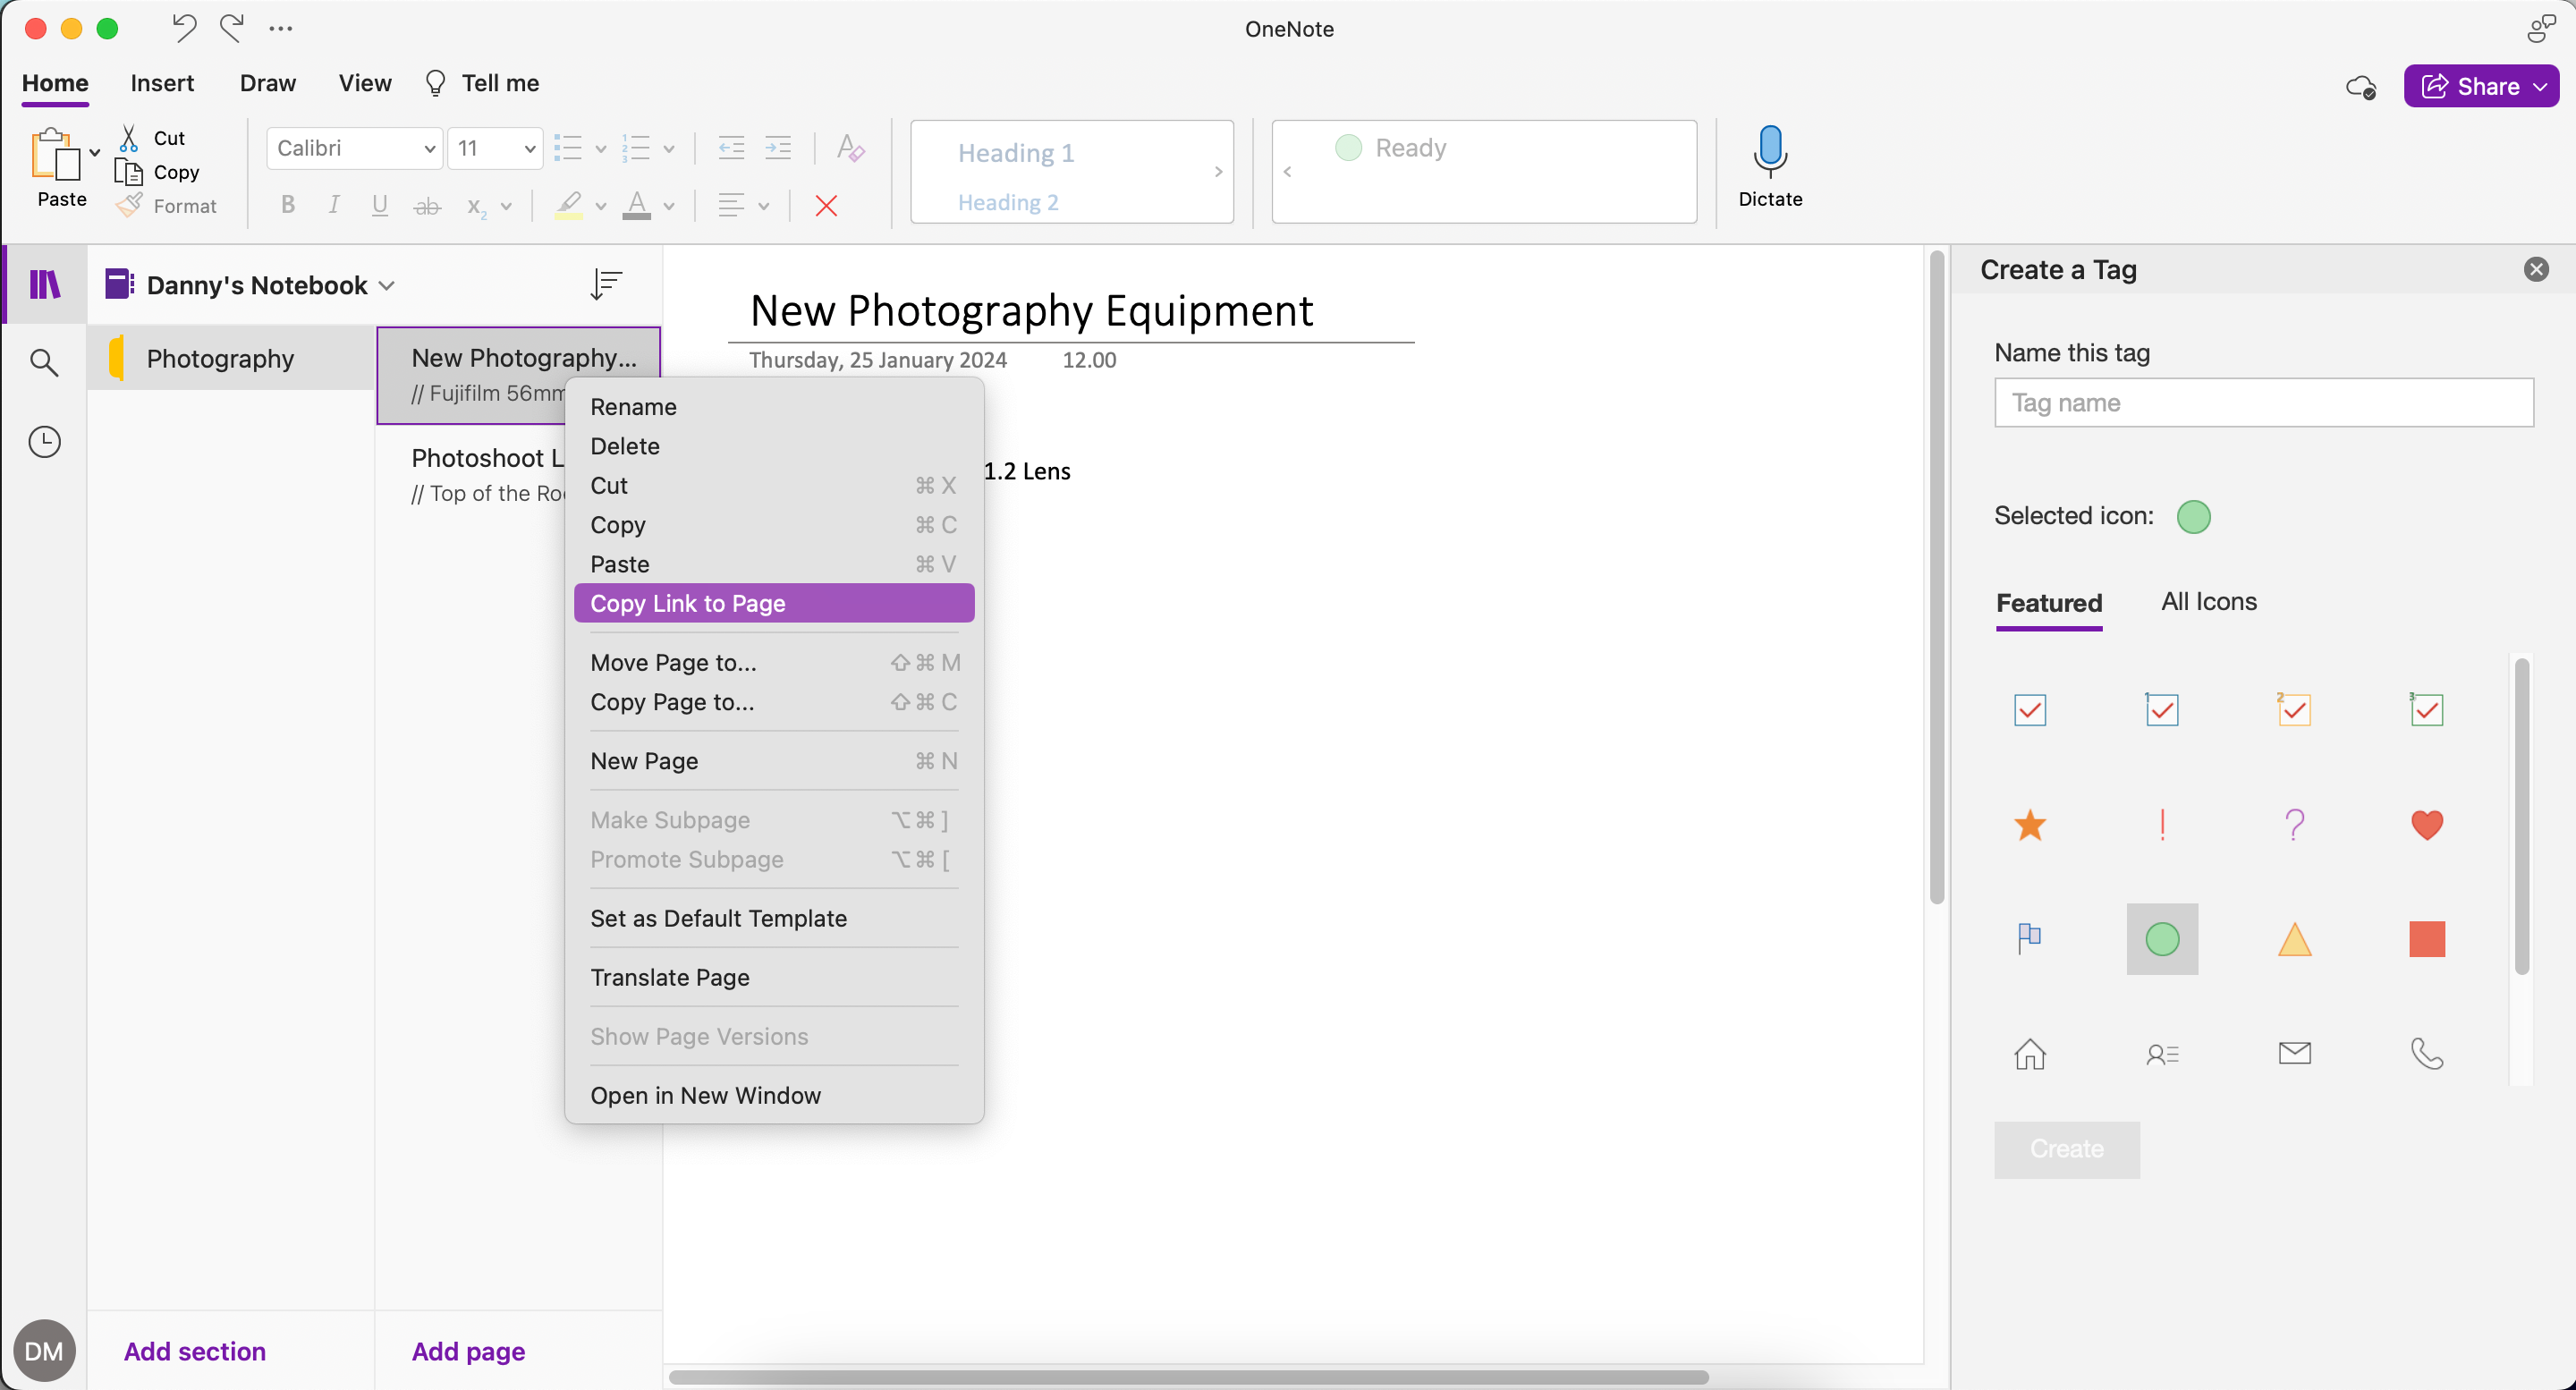 Copy a Link to Your Page in Microsoft OneNote